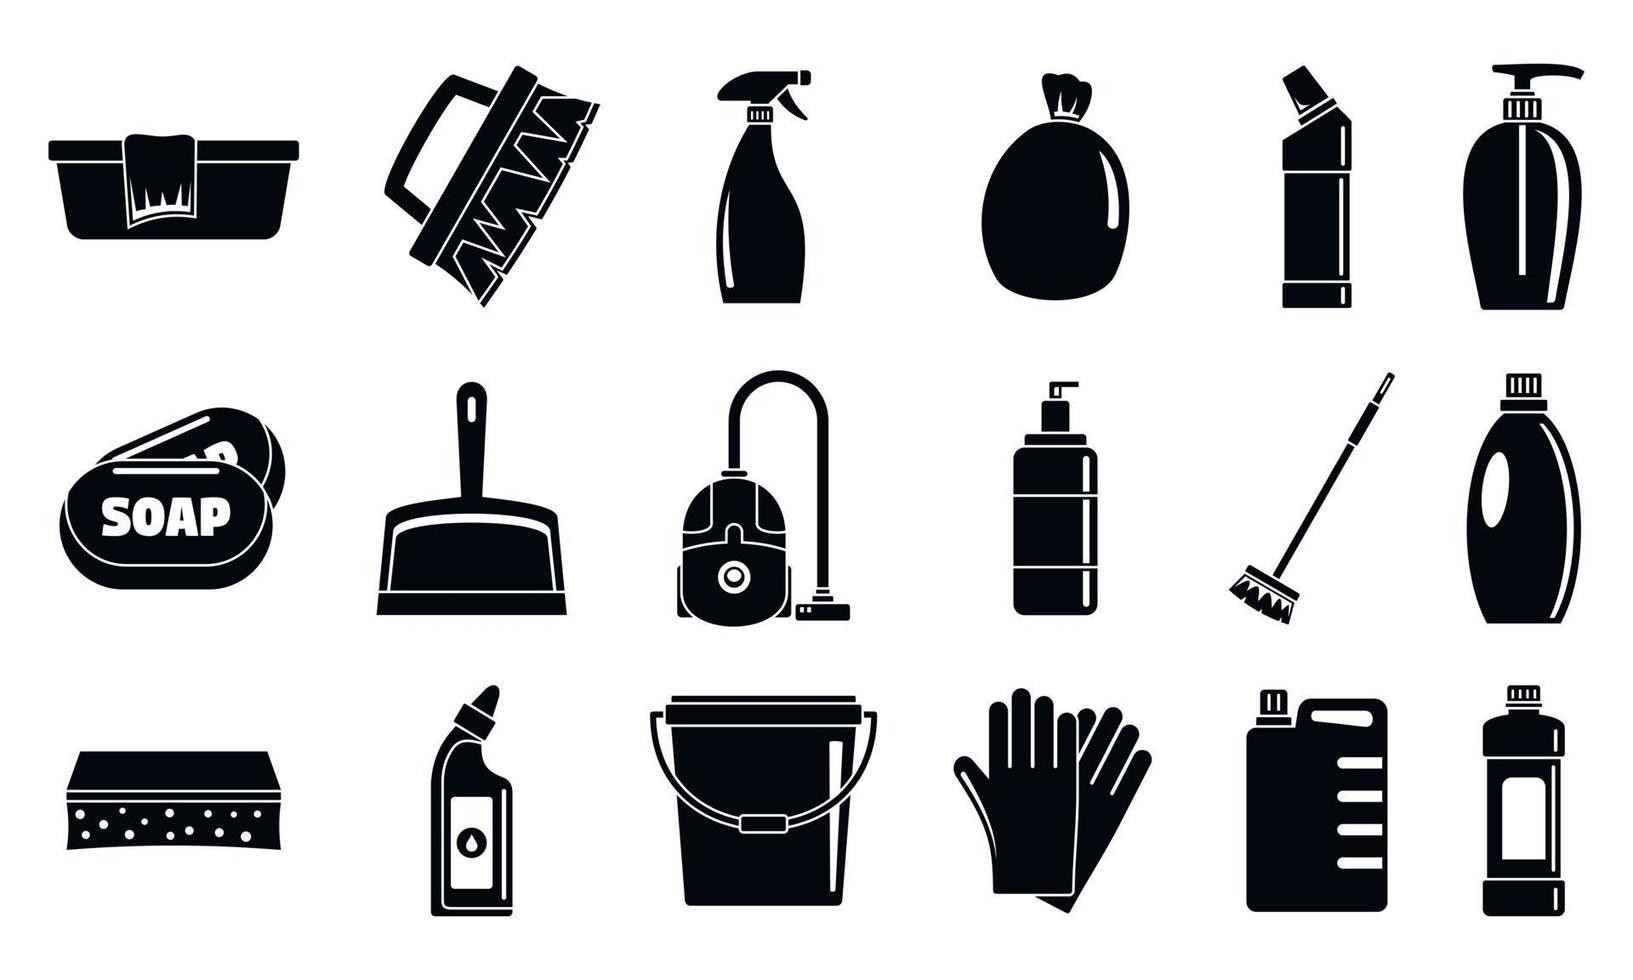 House cleaner equipment icons set, simple style vector